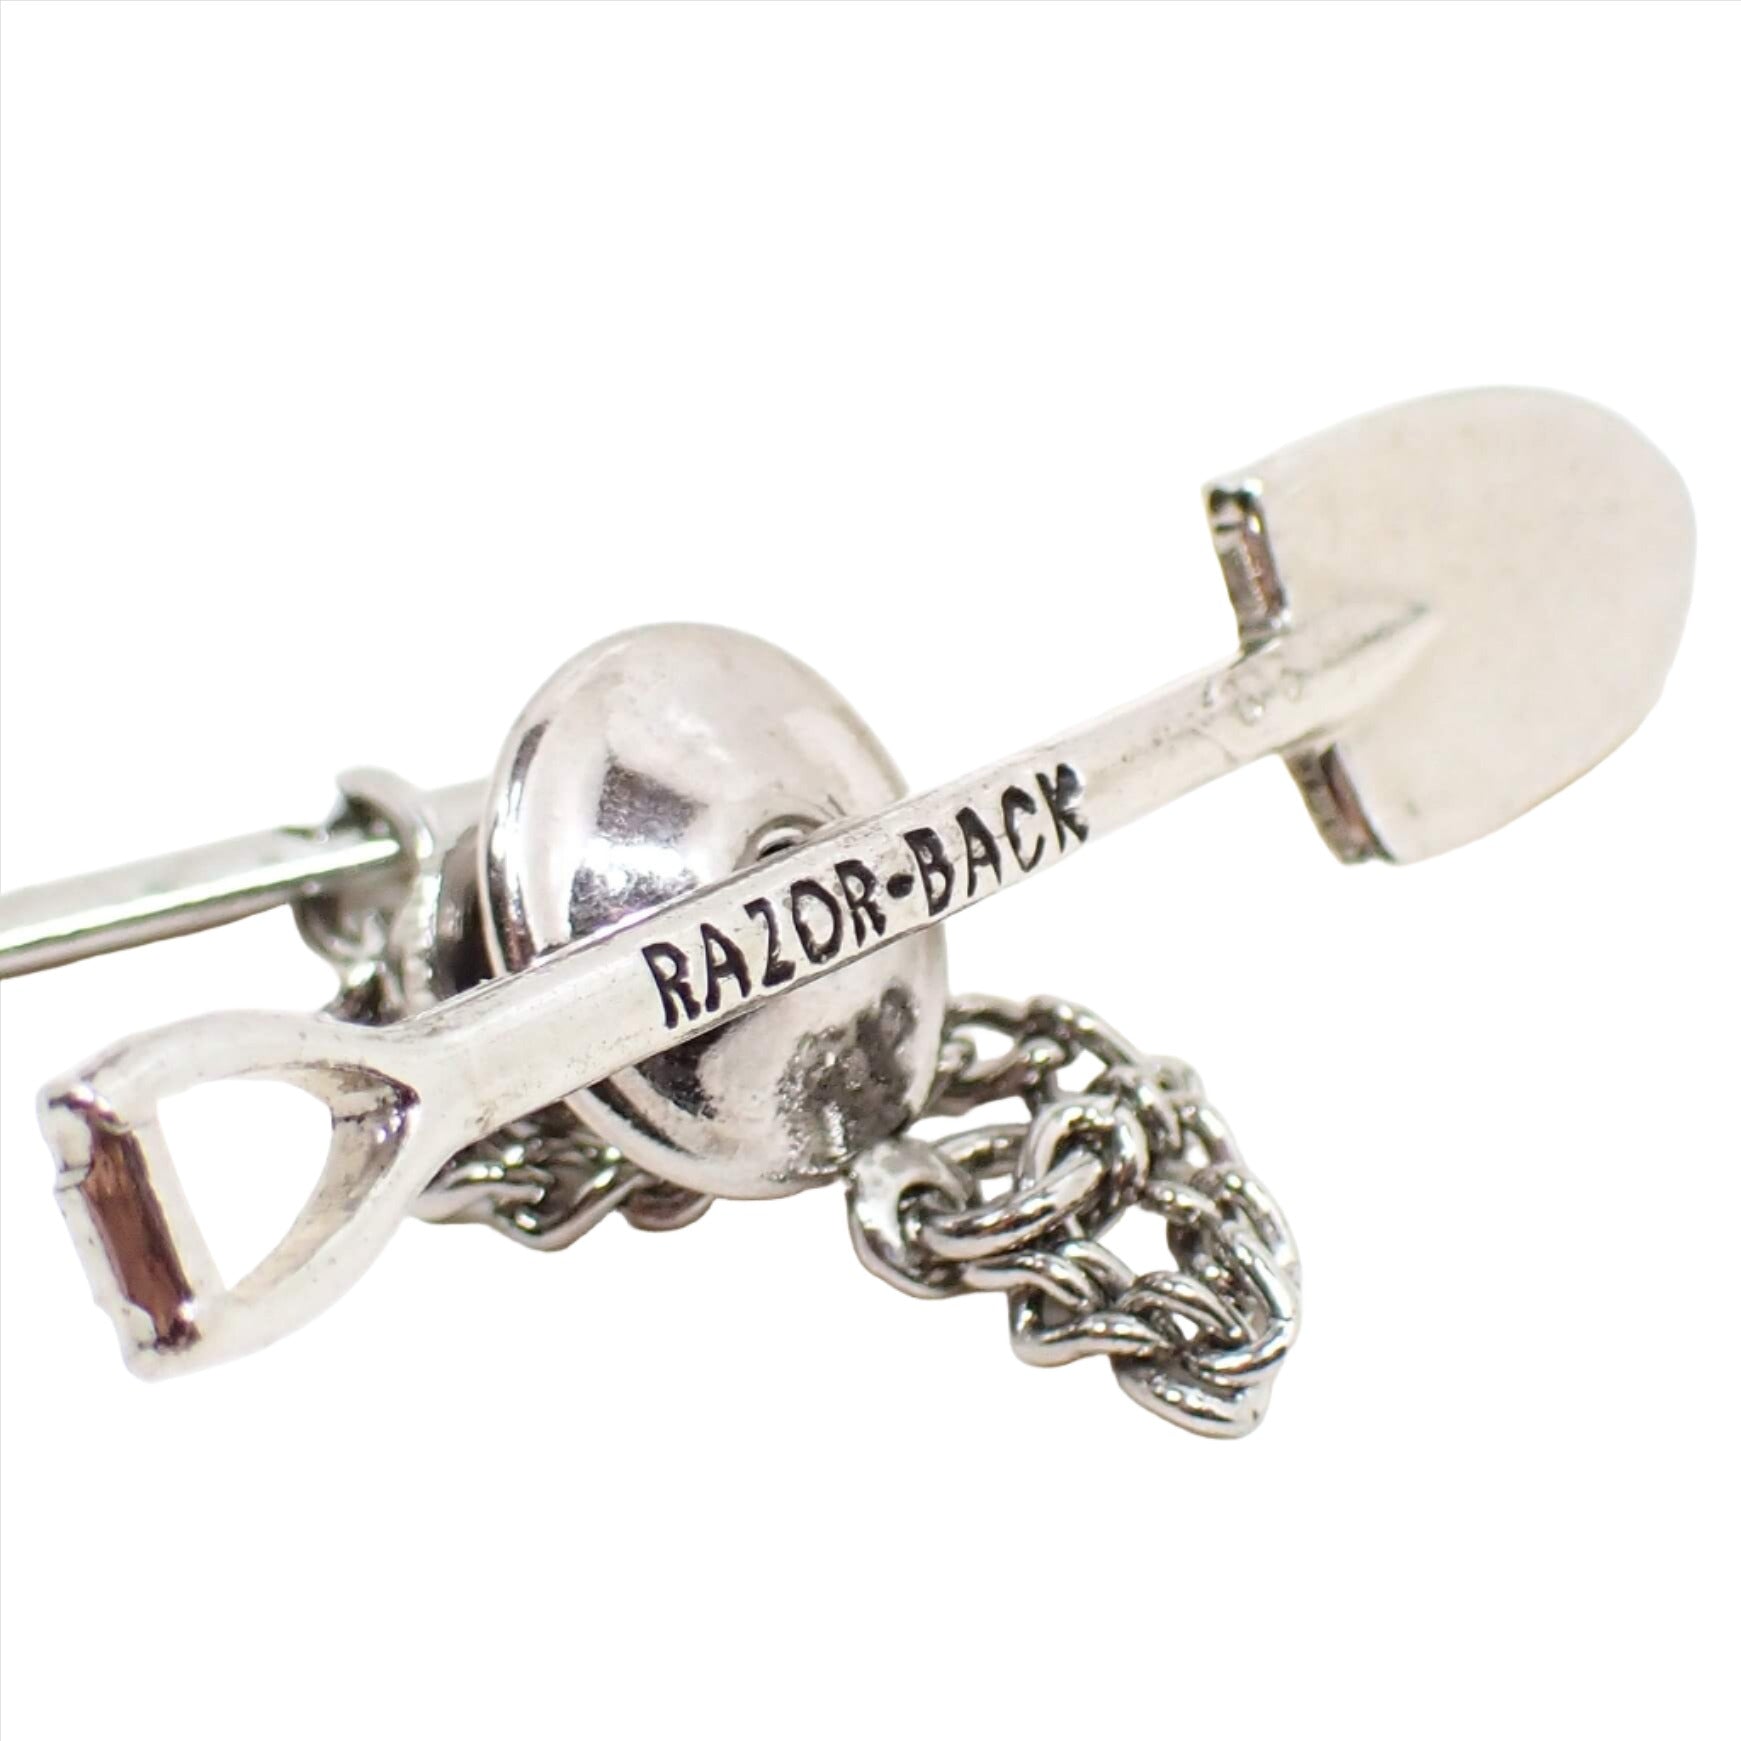 Enlarged front view of the retro vintage shovel tie tack. The metal is silver tone in color. It's shaped like a shovel and has the words Razor Back on the handle part in black.